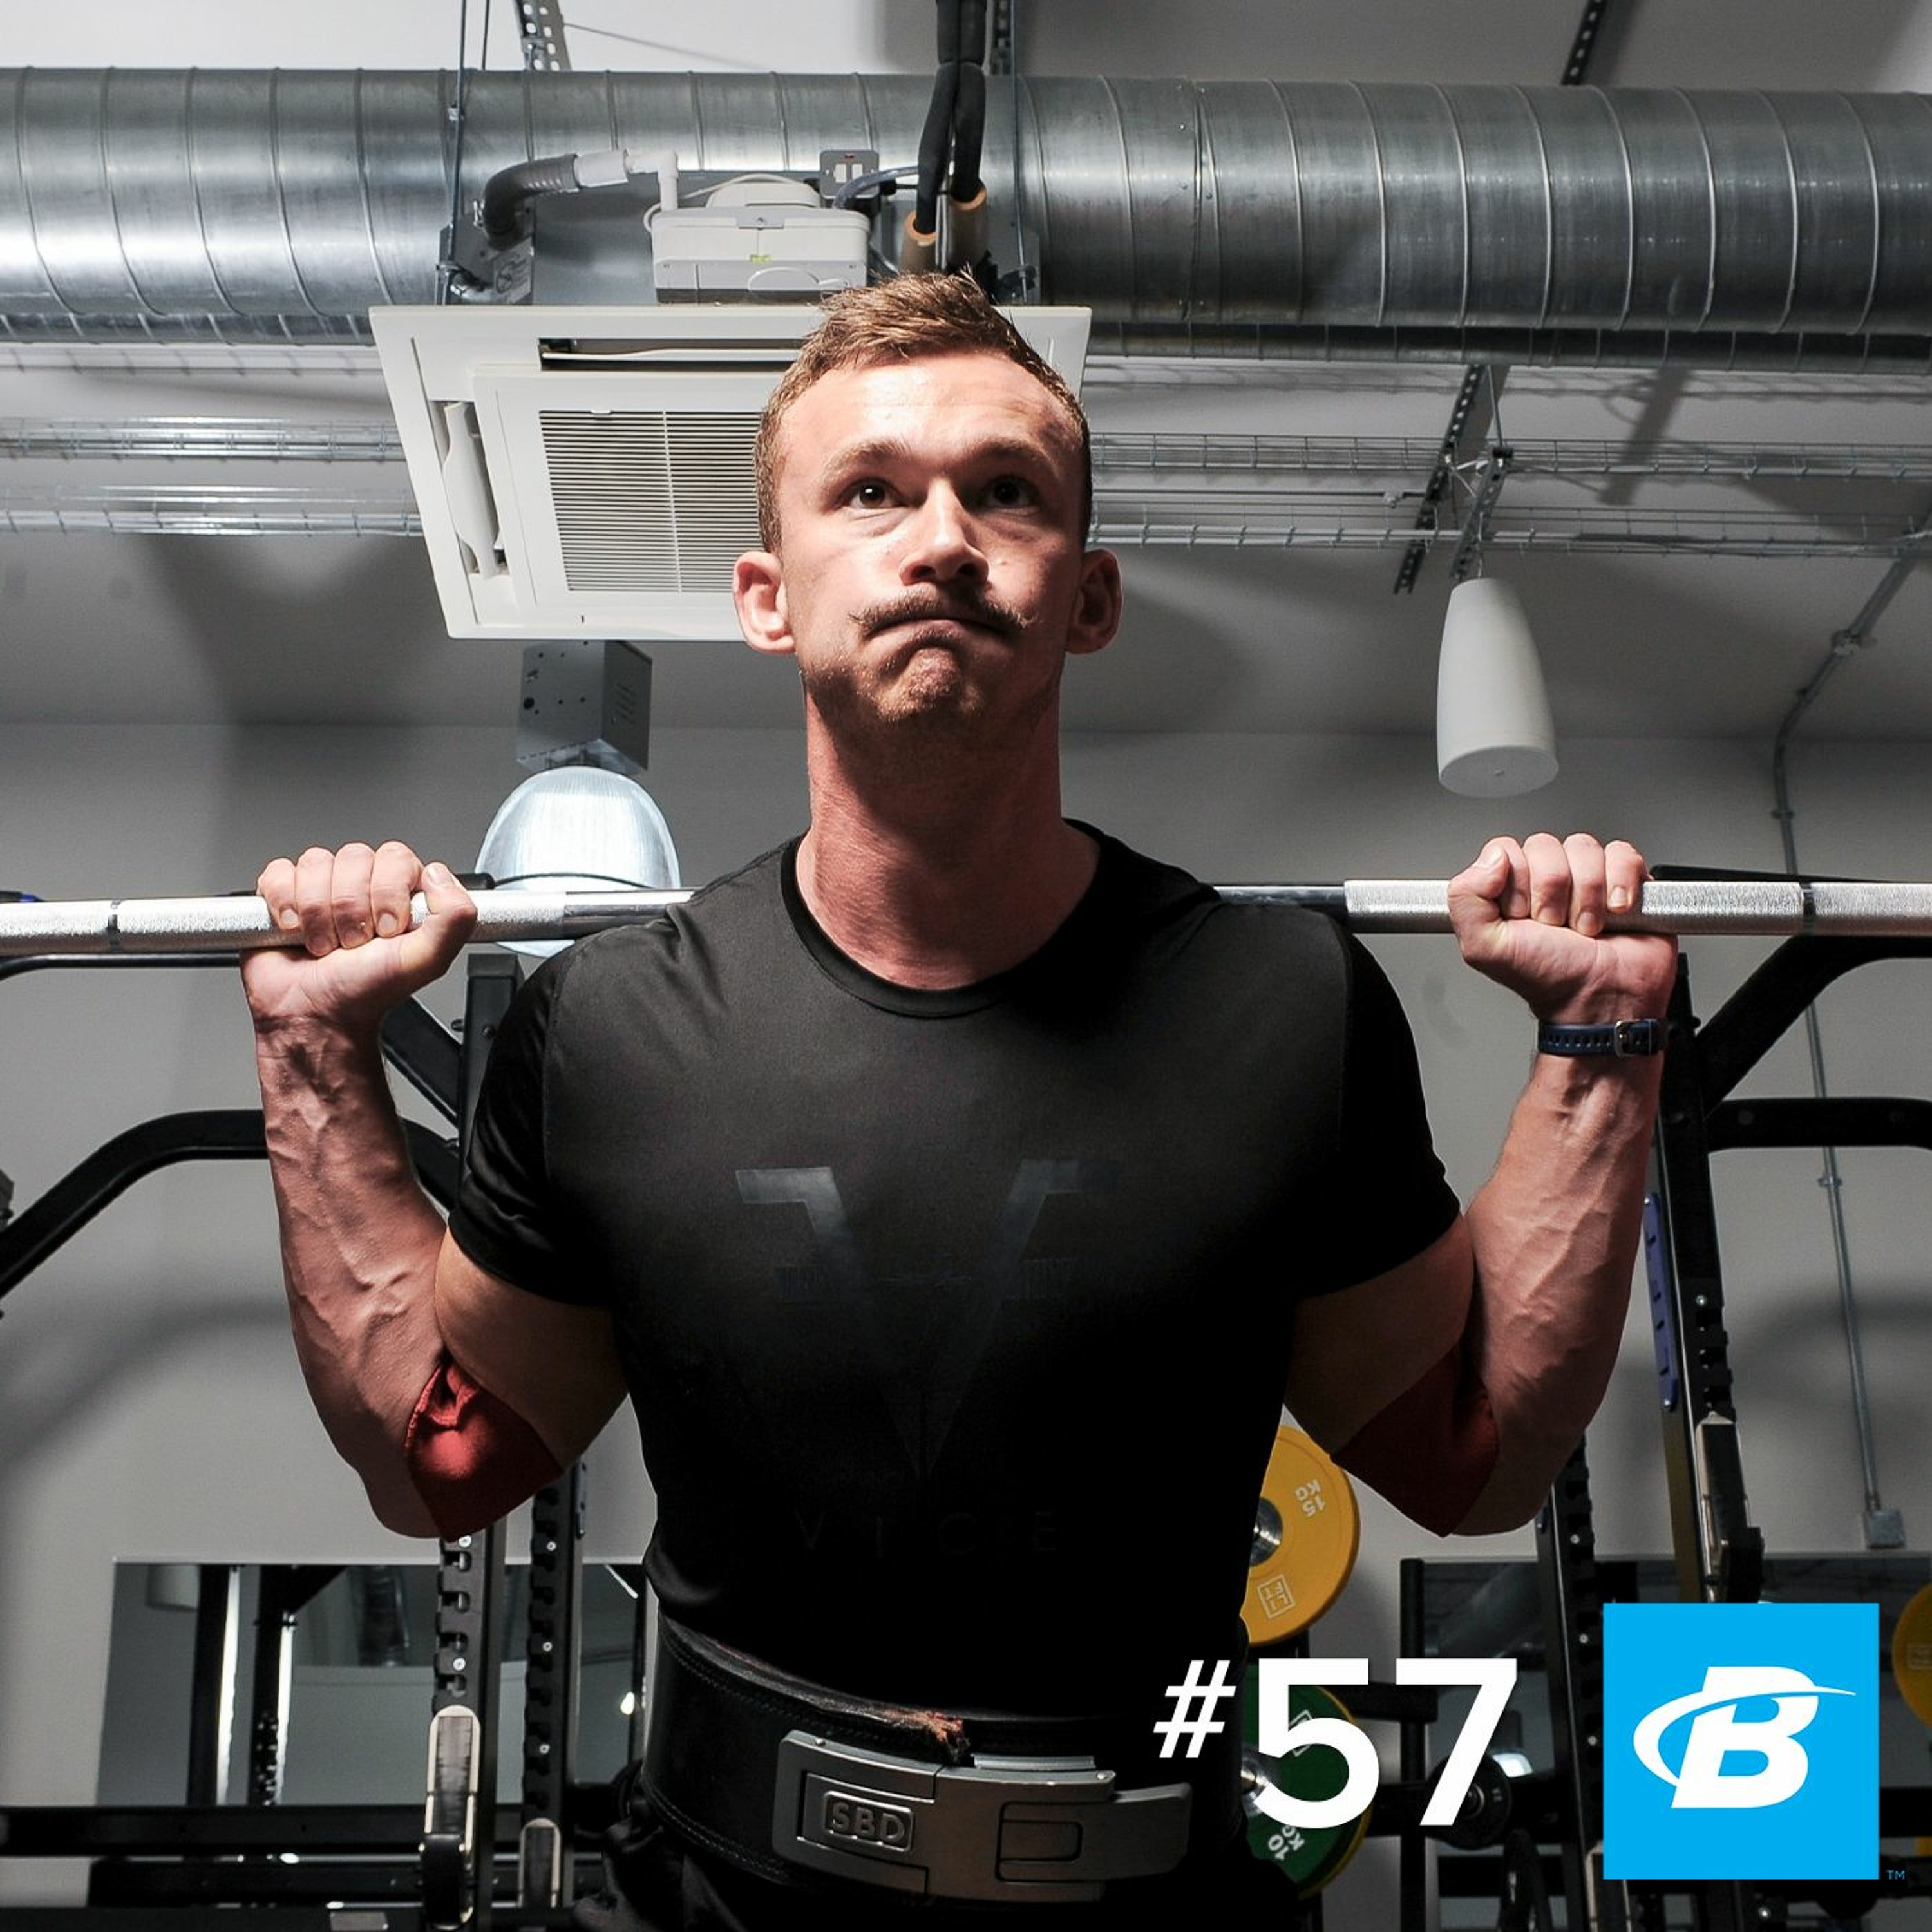 Episode 57: Fergus Crawley on Squatting 132 pounds, 7,600 times, in 24 Hours